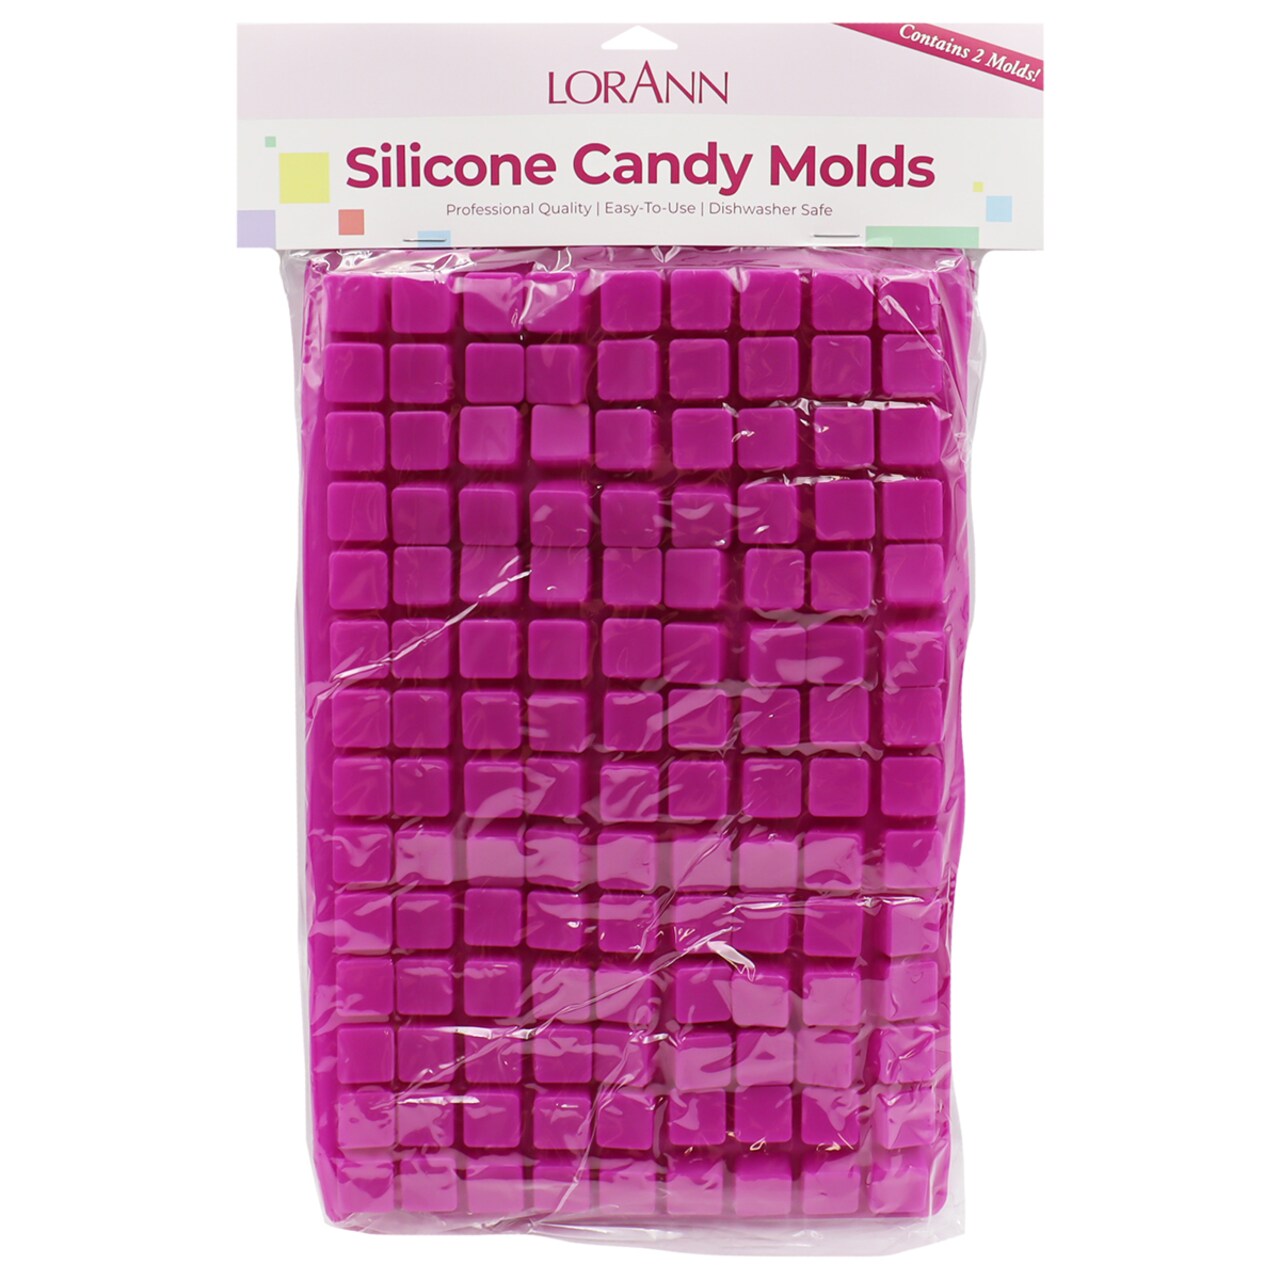 Silicone Square Cube Candy Molds, 2-Pack by Lorann Flavors